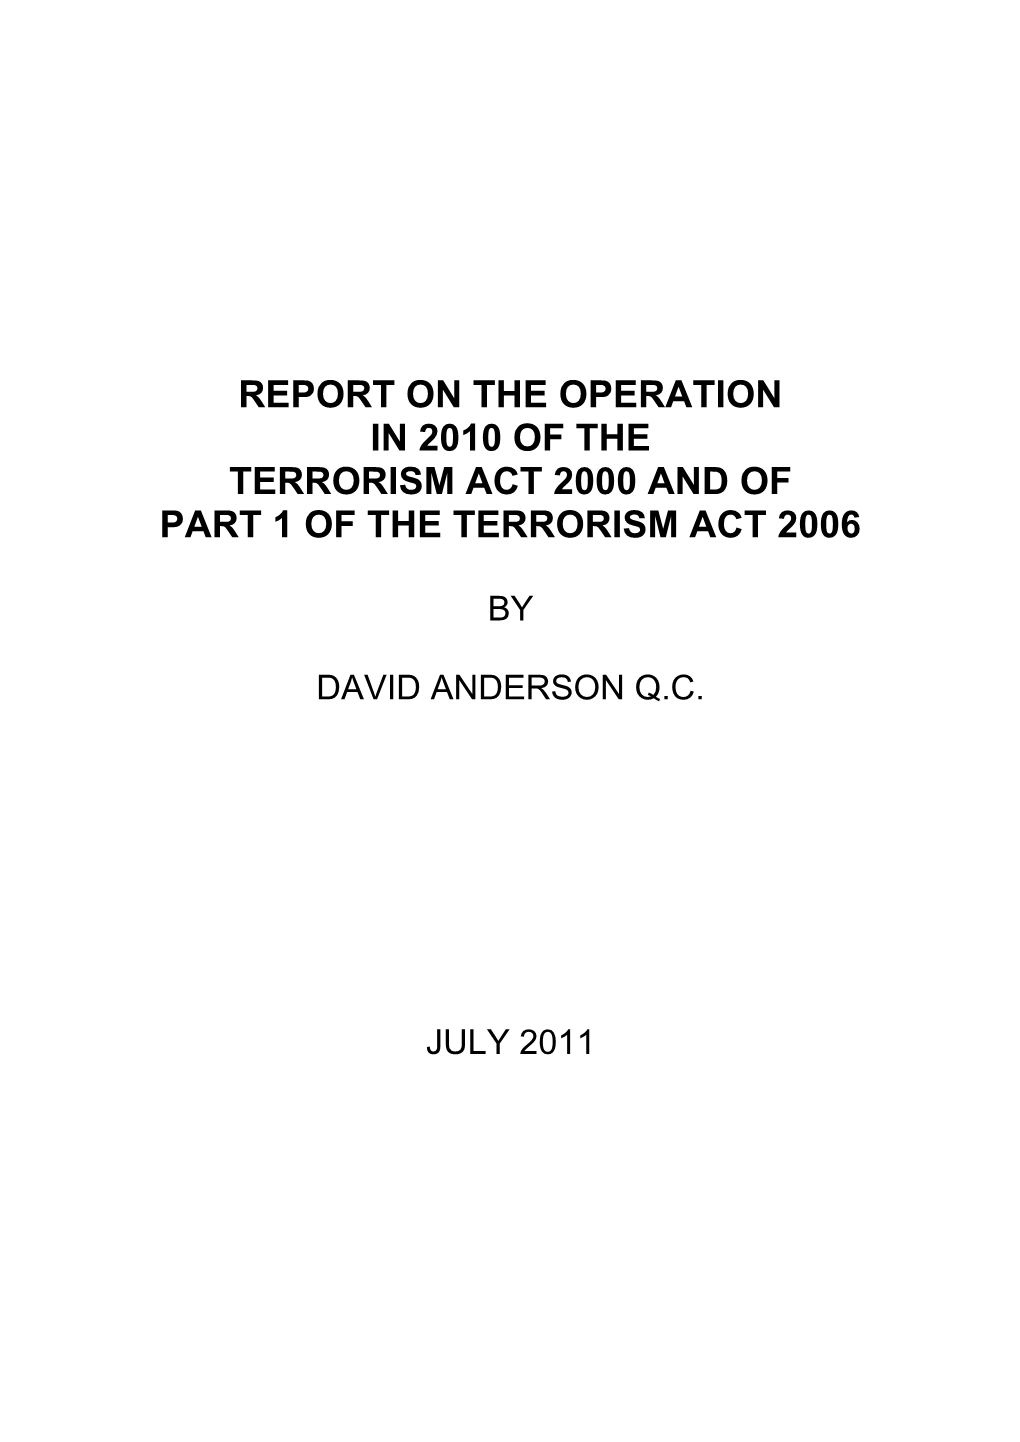 Report on the Operation in 2010 of the Terrorism Act 2000 and of Part 1 of the Terrorism Act 2006